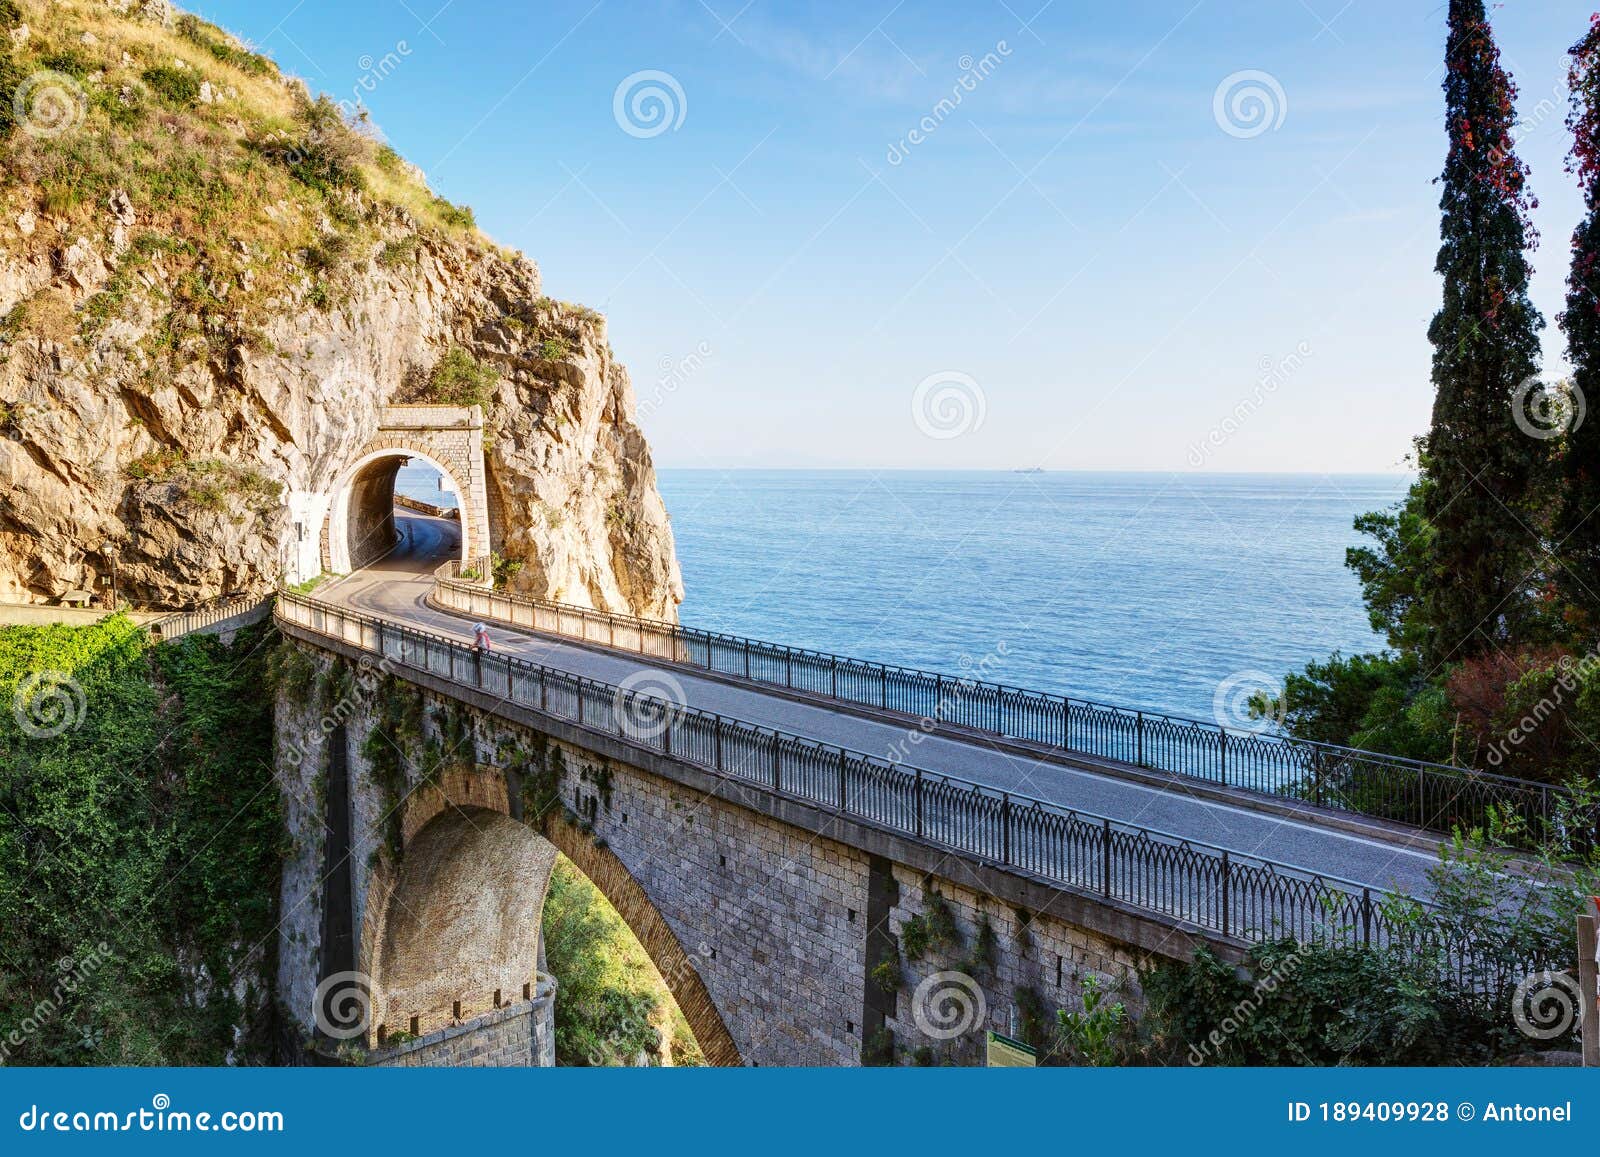 famous scenic road of amalfi coast, italy.  a view from the fiordo of furore